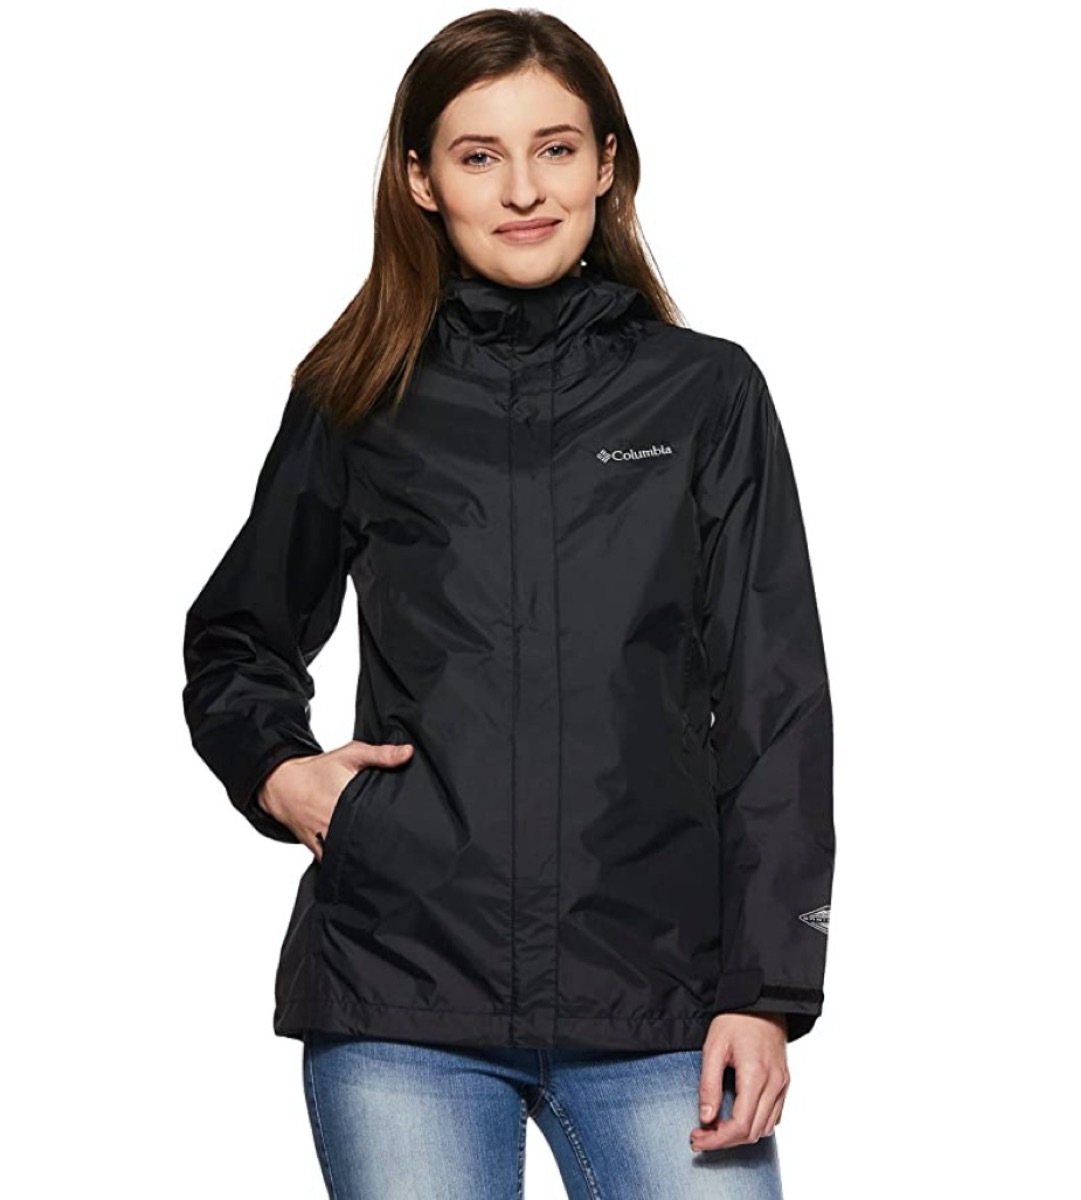 young white woman in black rain jacket